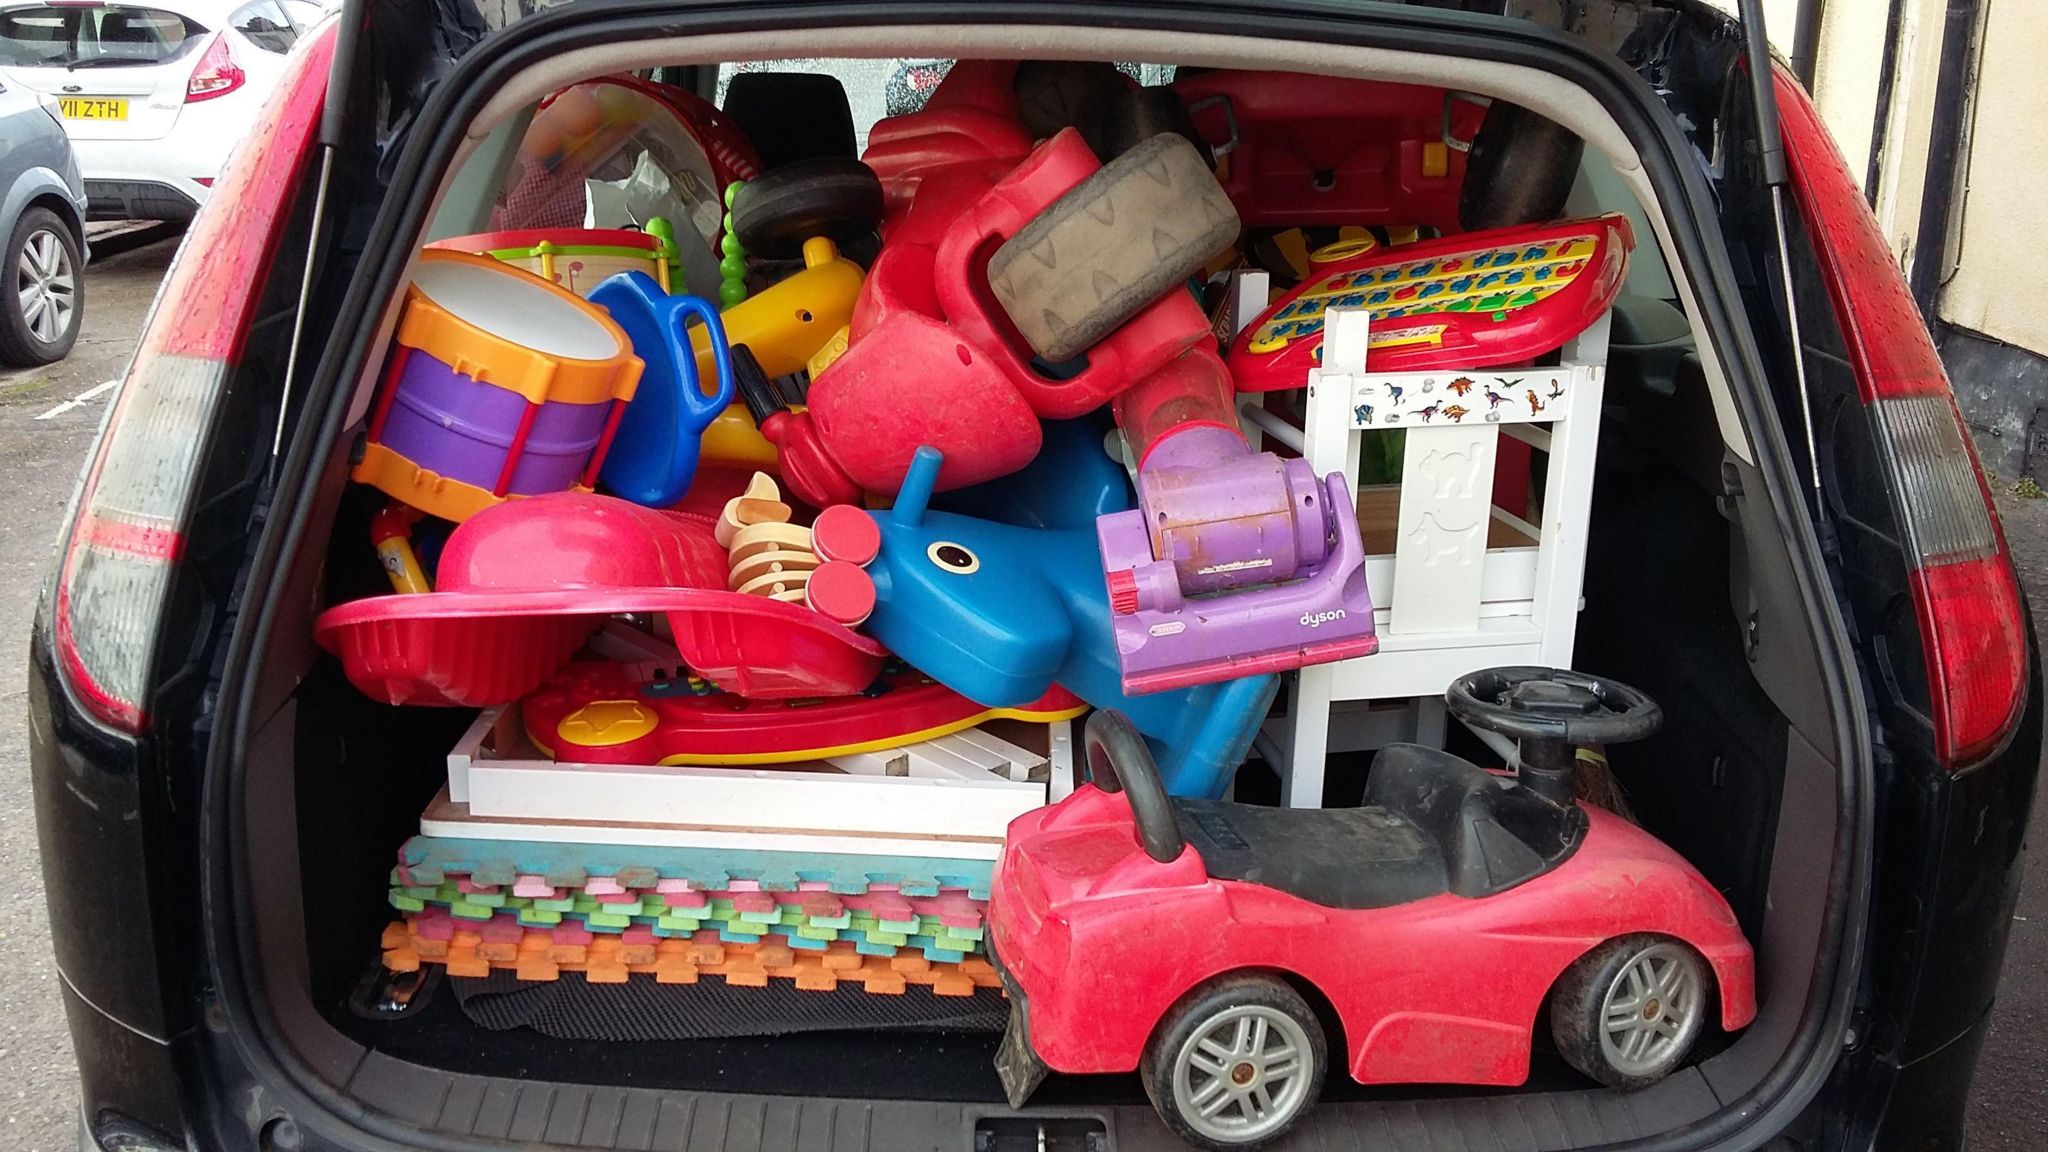 Toys packed into boot